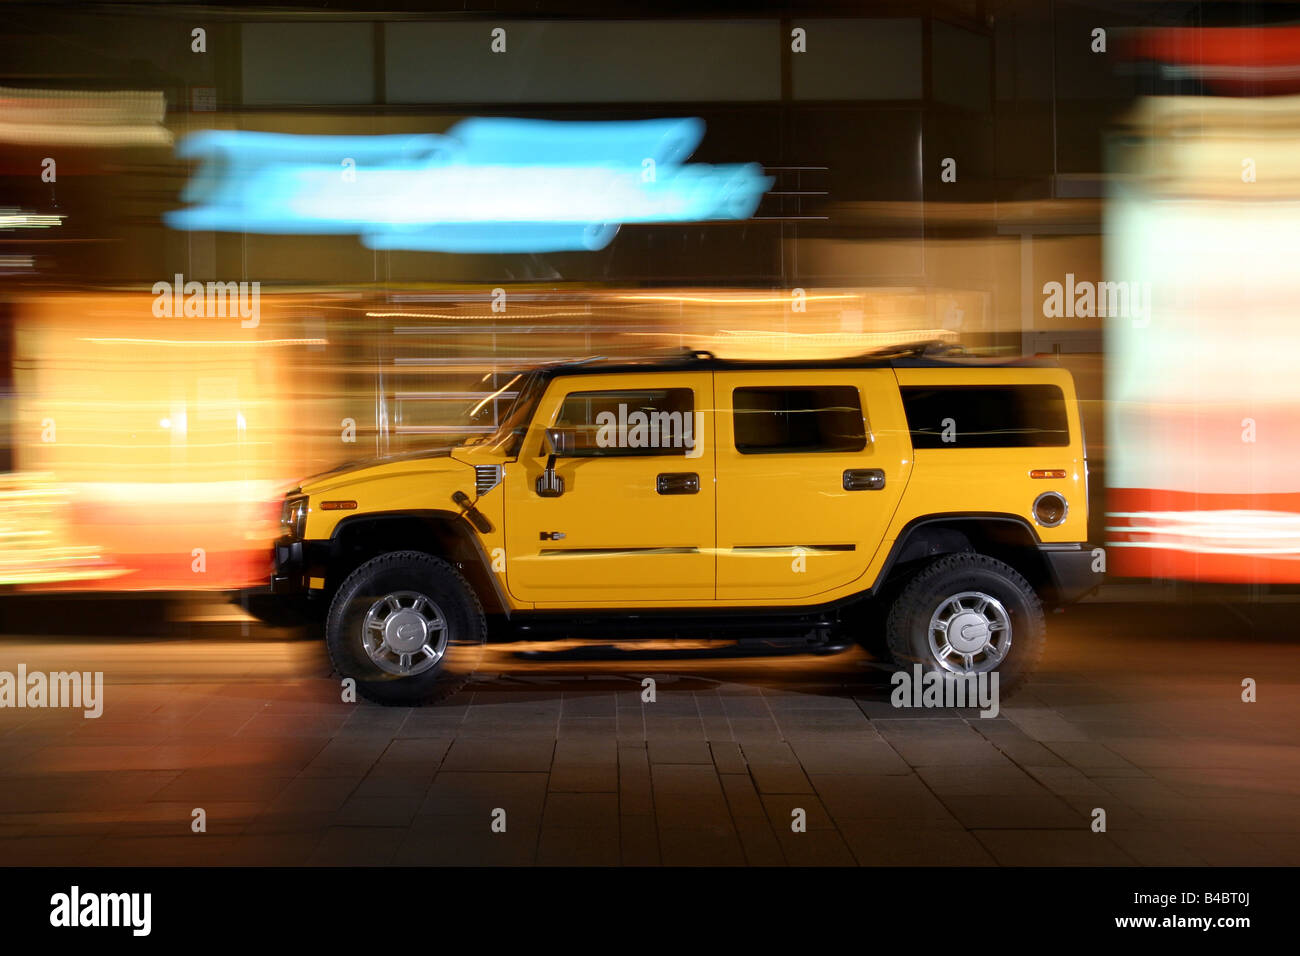 Car, Chevrolet Hummer H2, cross country vehicle, model year 2001-, yellow, driving, side view, City, at night, photographer: Han Stock Photo